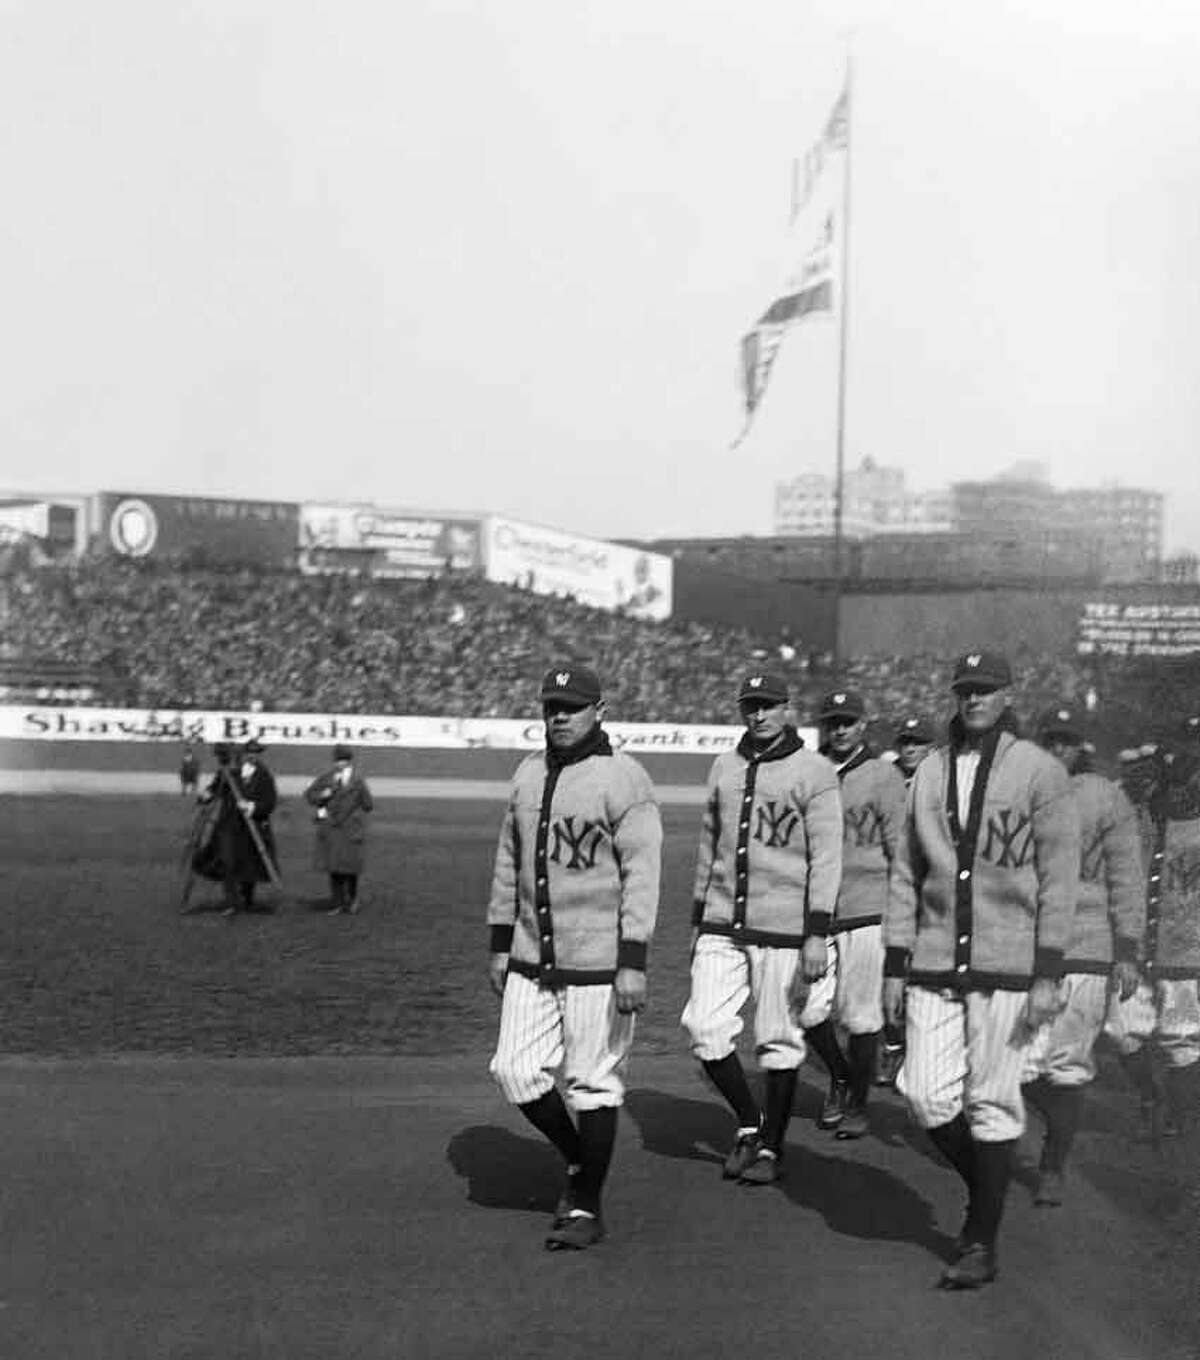 Old Yankee Stadium's rise and fall: Complete story of 'The House that Ruth  Built' 100 years after its opening 